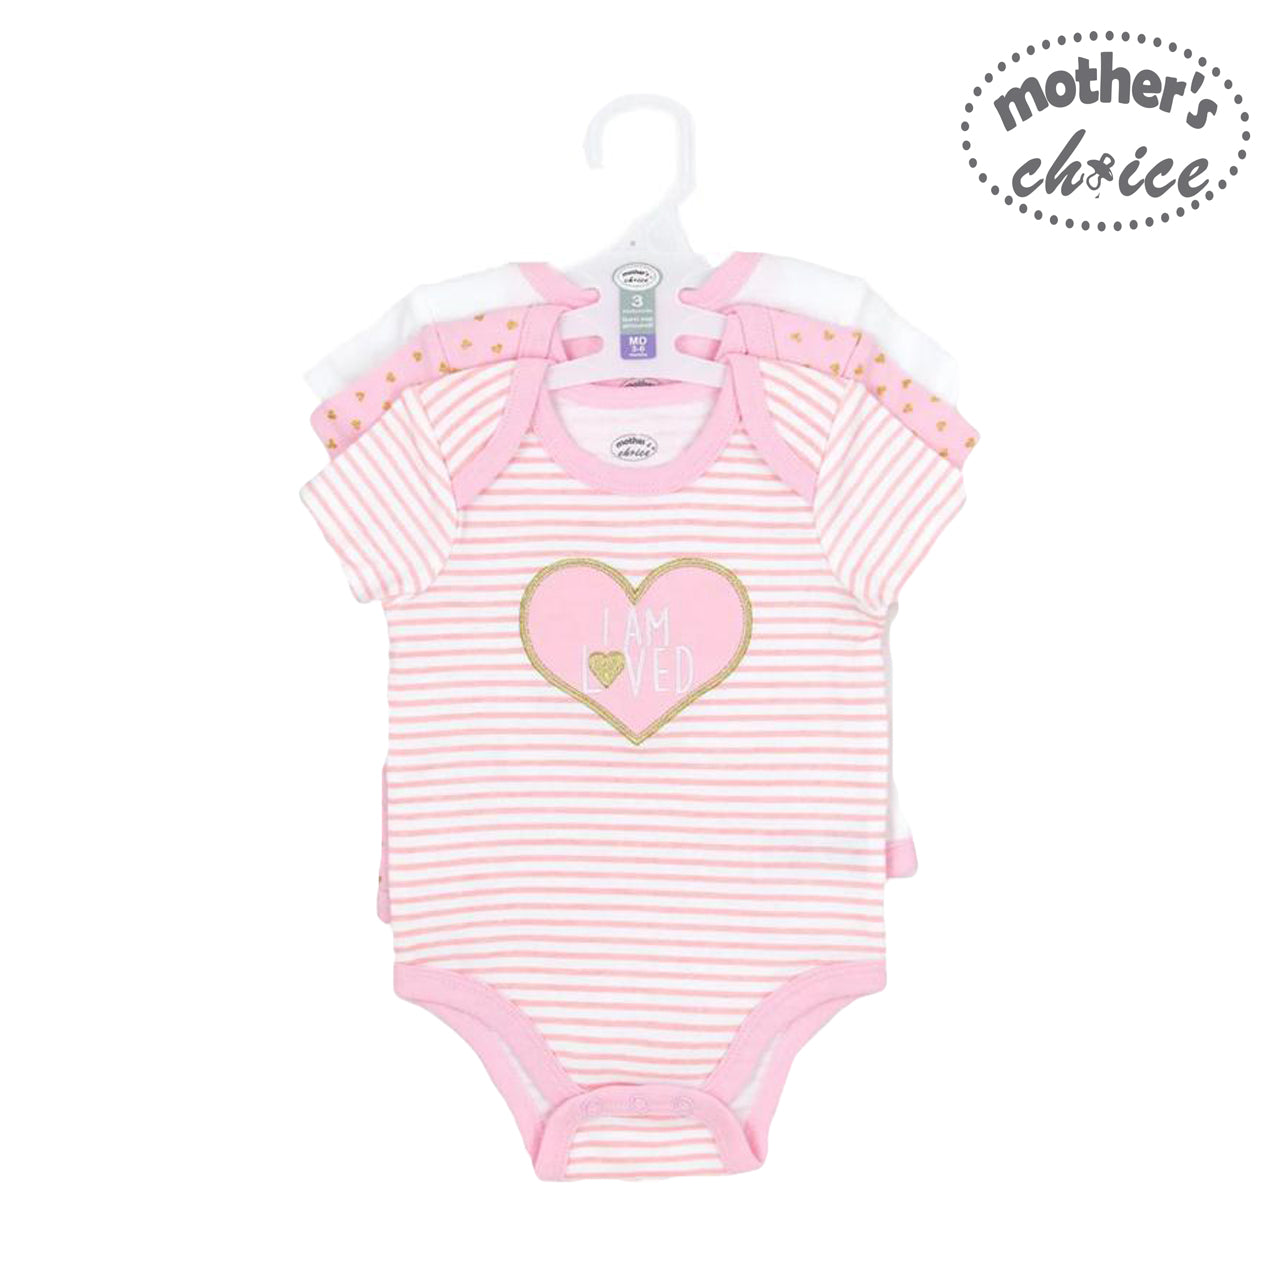 Mother's Choice 3 Pack Short Sleeves Onesie (I am Love/ IT2014)